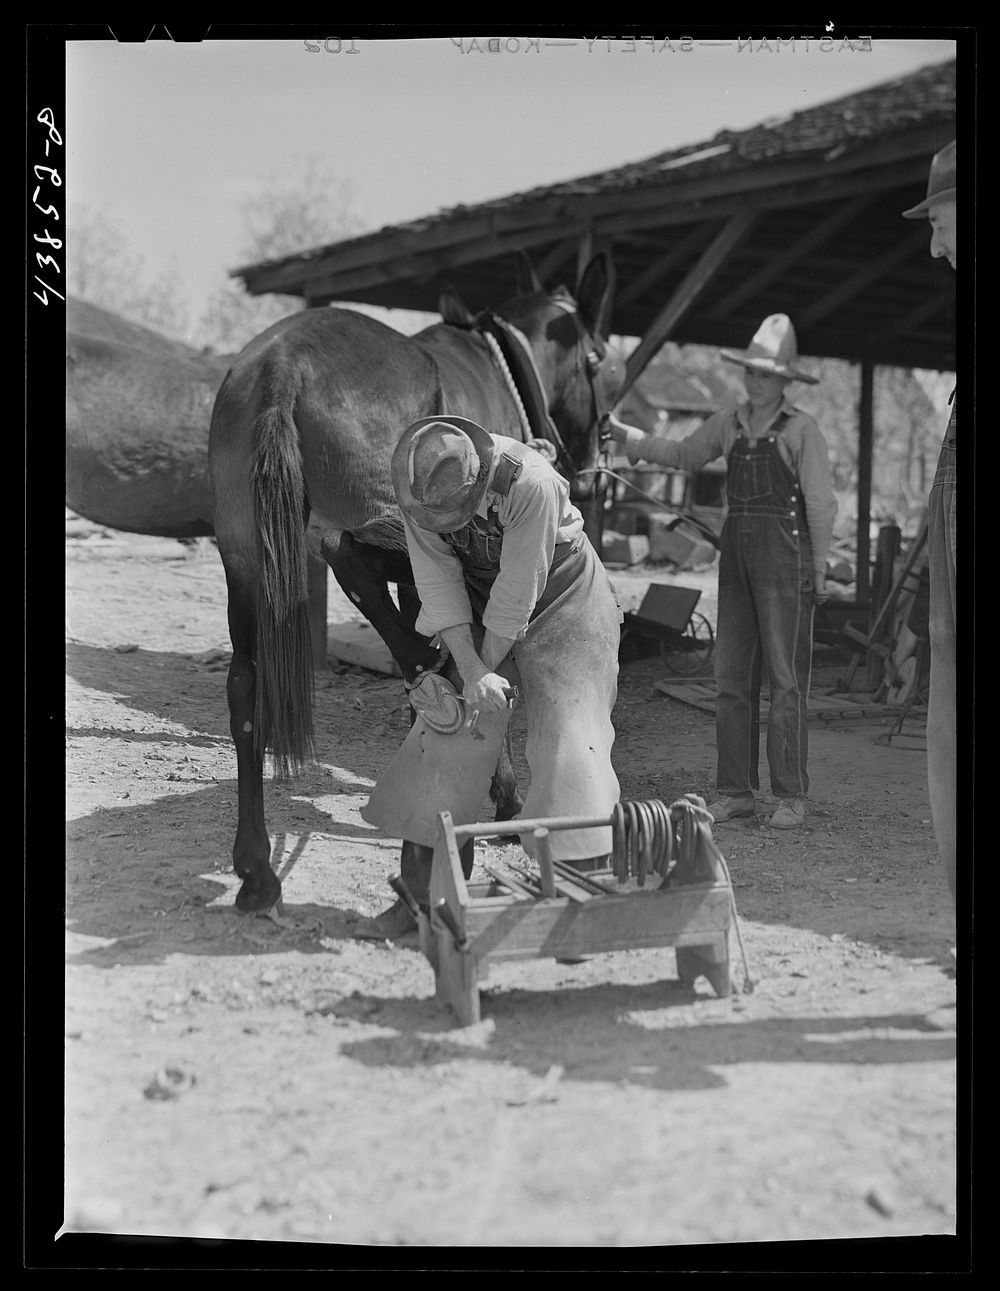 Shoeing a mule in Glenloch. Heard County, Georgia. Sourced from the Library of Congress.